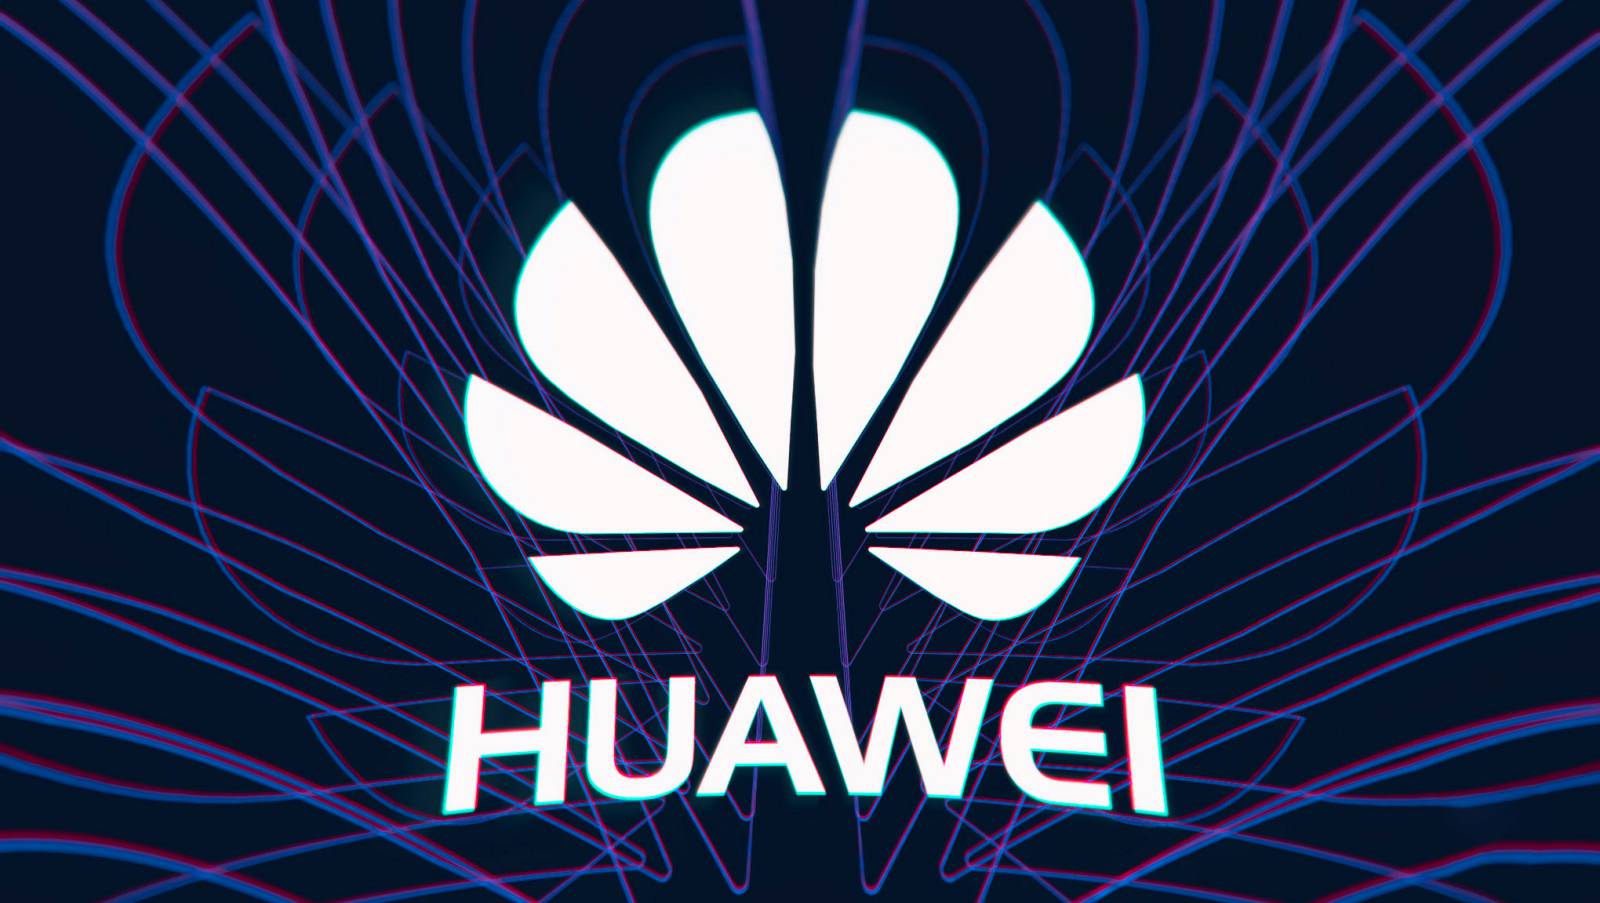 Huawei 5g problems